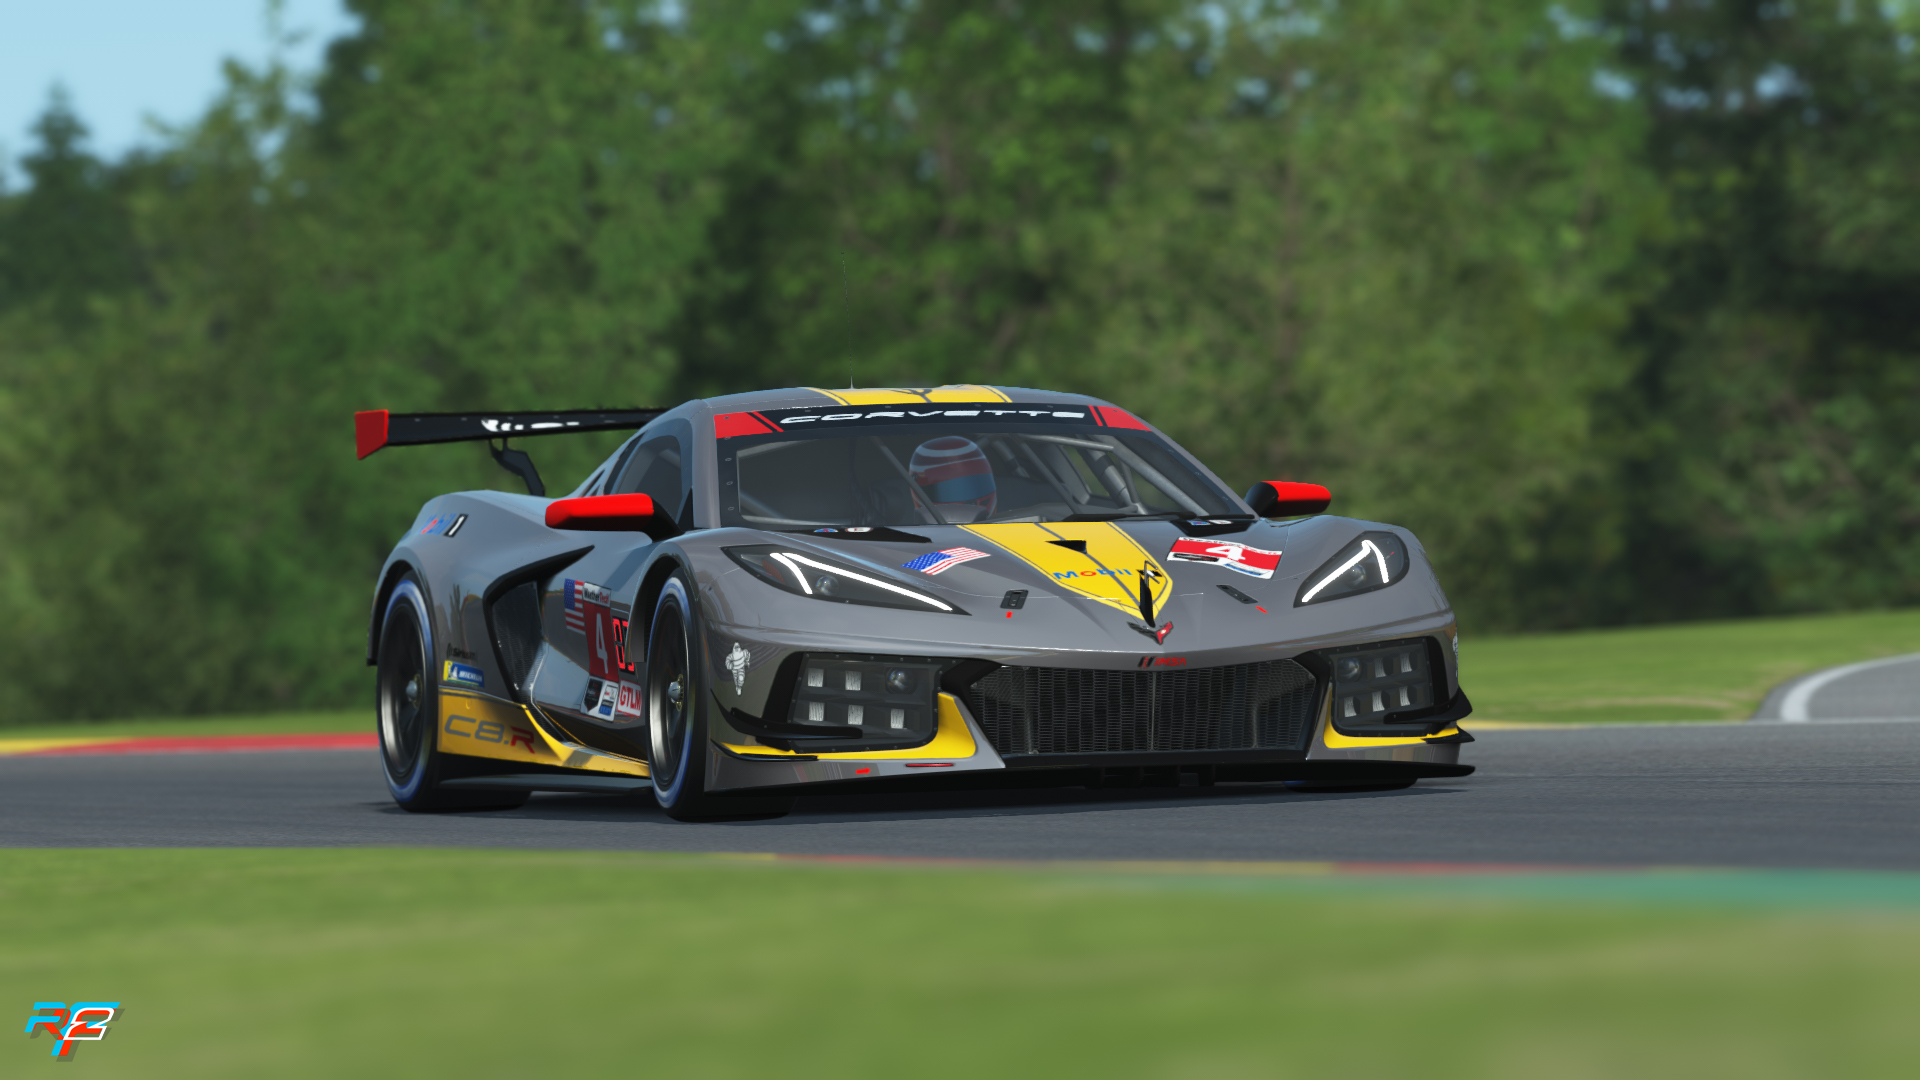 More information about "rFactor 2: nuova build, aggiornate le vetture GTE ed il Nurburgring"